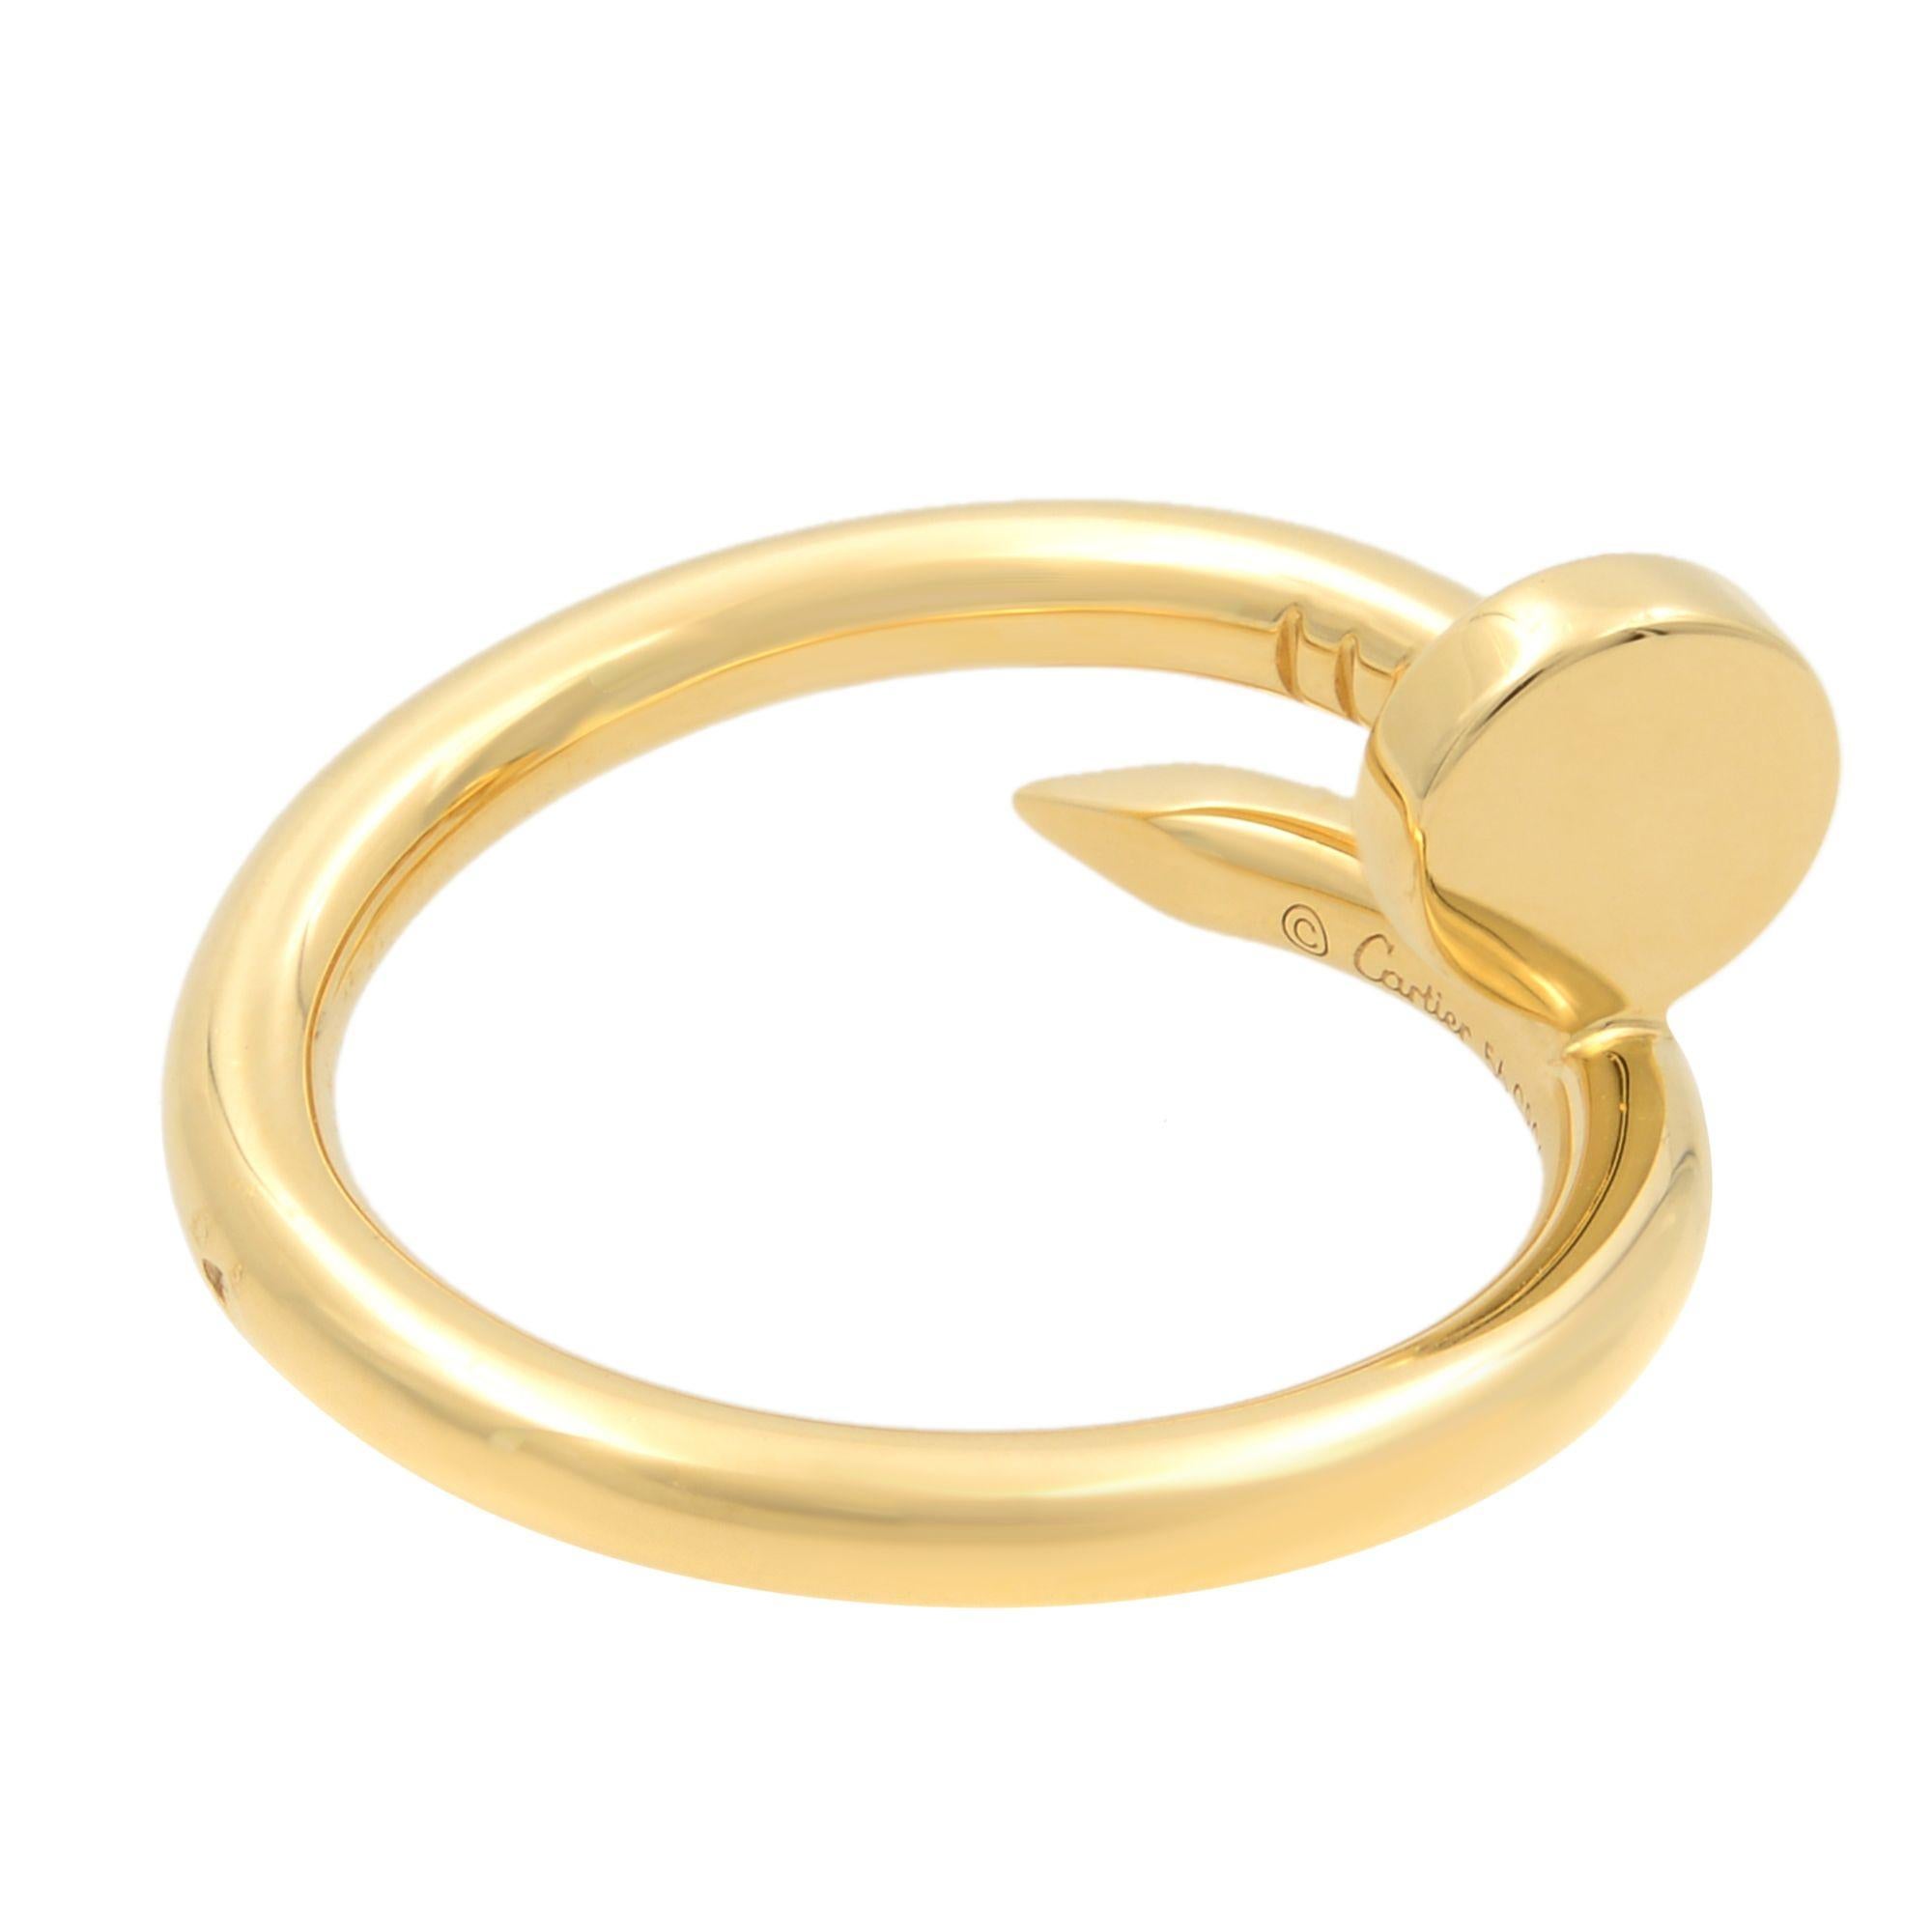 Cartier Juste un Clou ring, 18K yellow gold. Width: 2.65mm. Ring Size 56 US 7.5.
Excellent pre-owned condition. Comes with Cartier box and papers are not included.